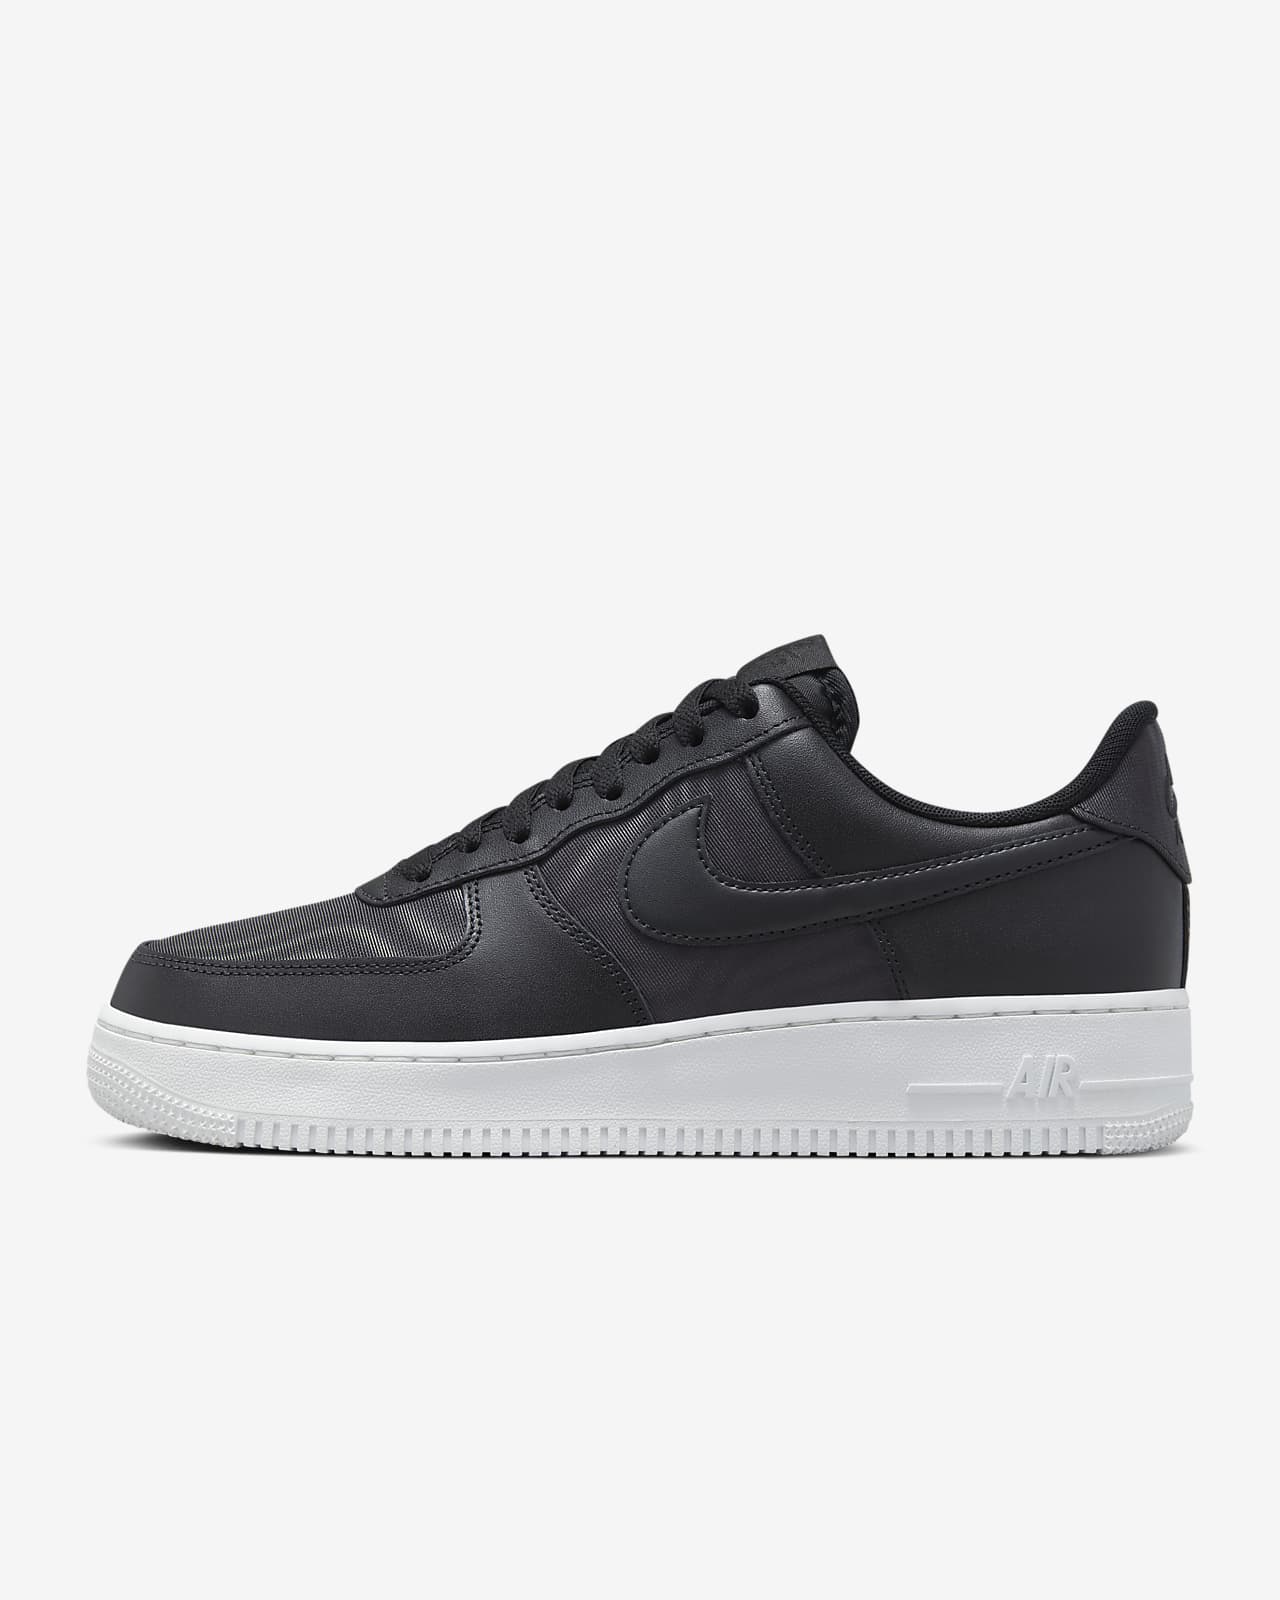 NIKE AIRFORCE1 LOW 07 LV8 22